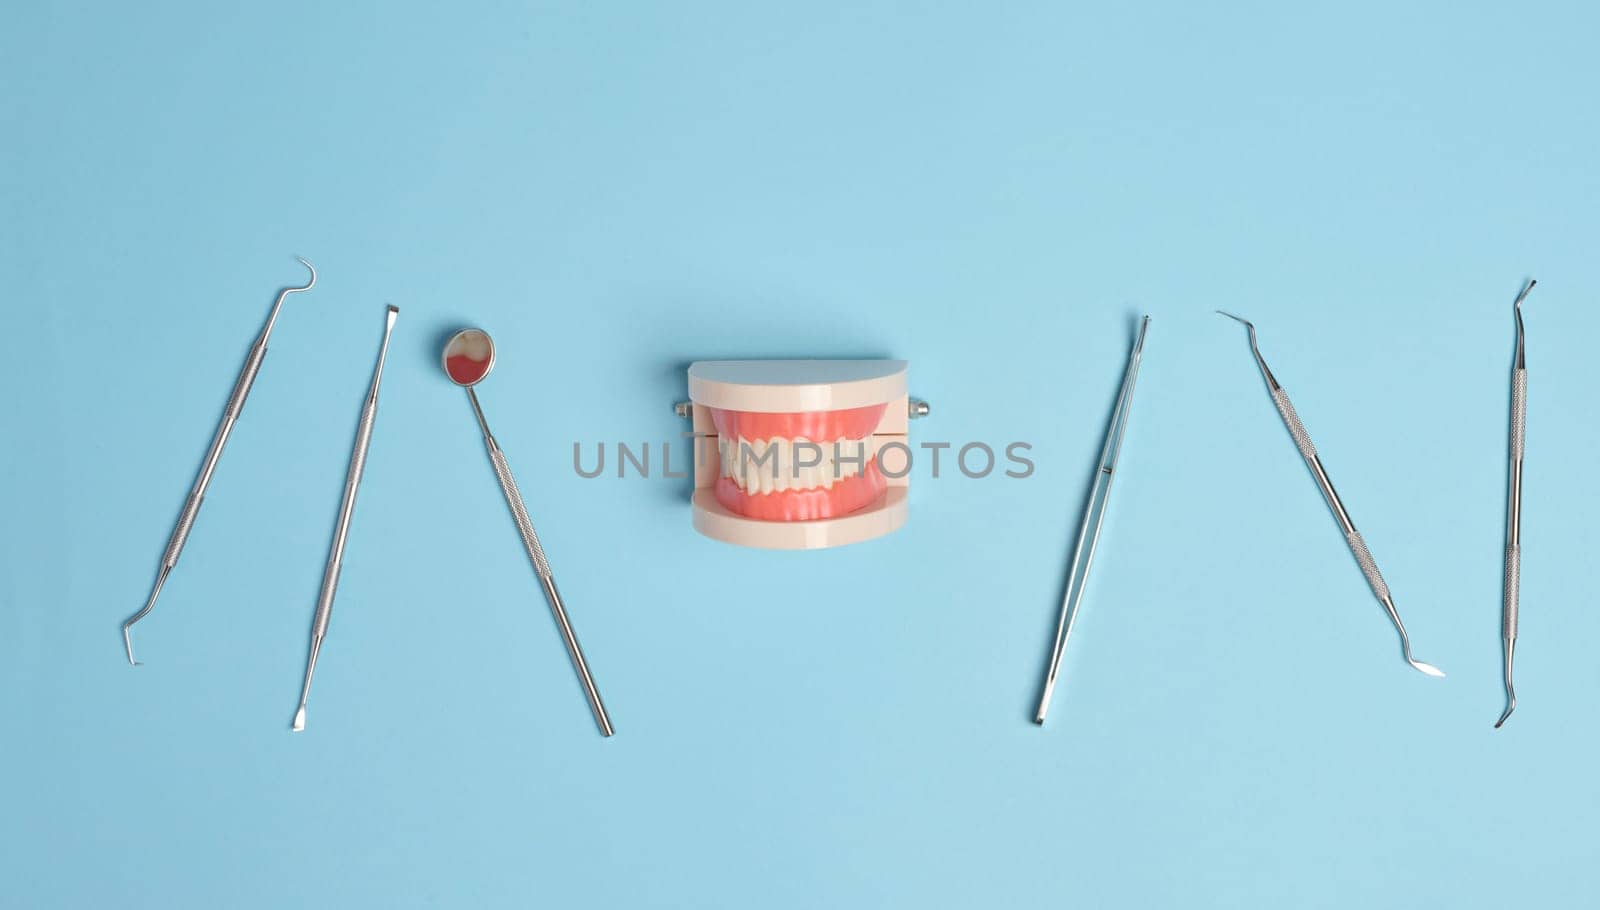 Plastic model of human jaw with white even teeth and a medical examination mirror, tweezers on a blue background by ndanko